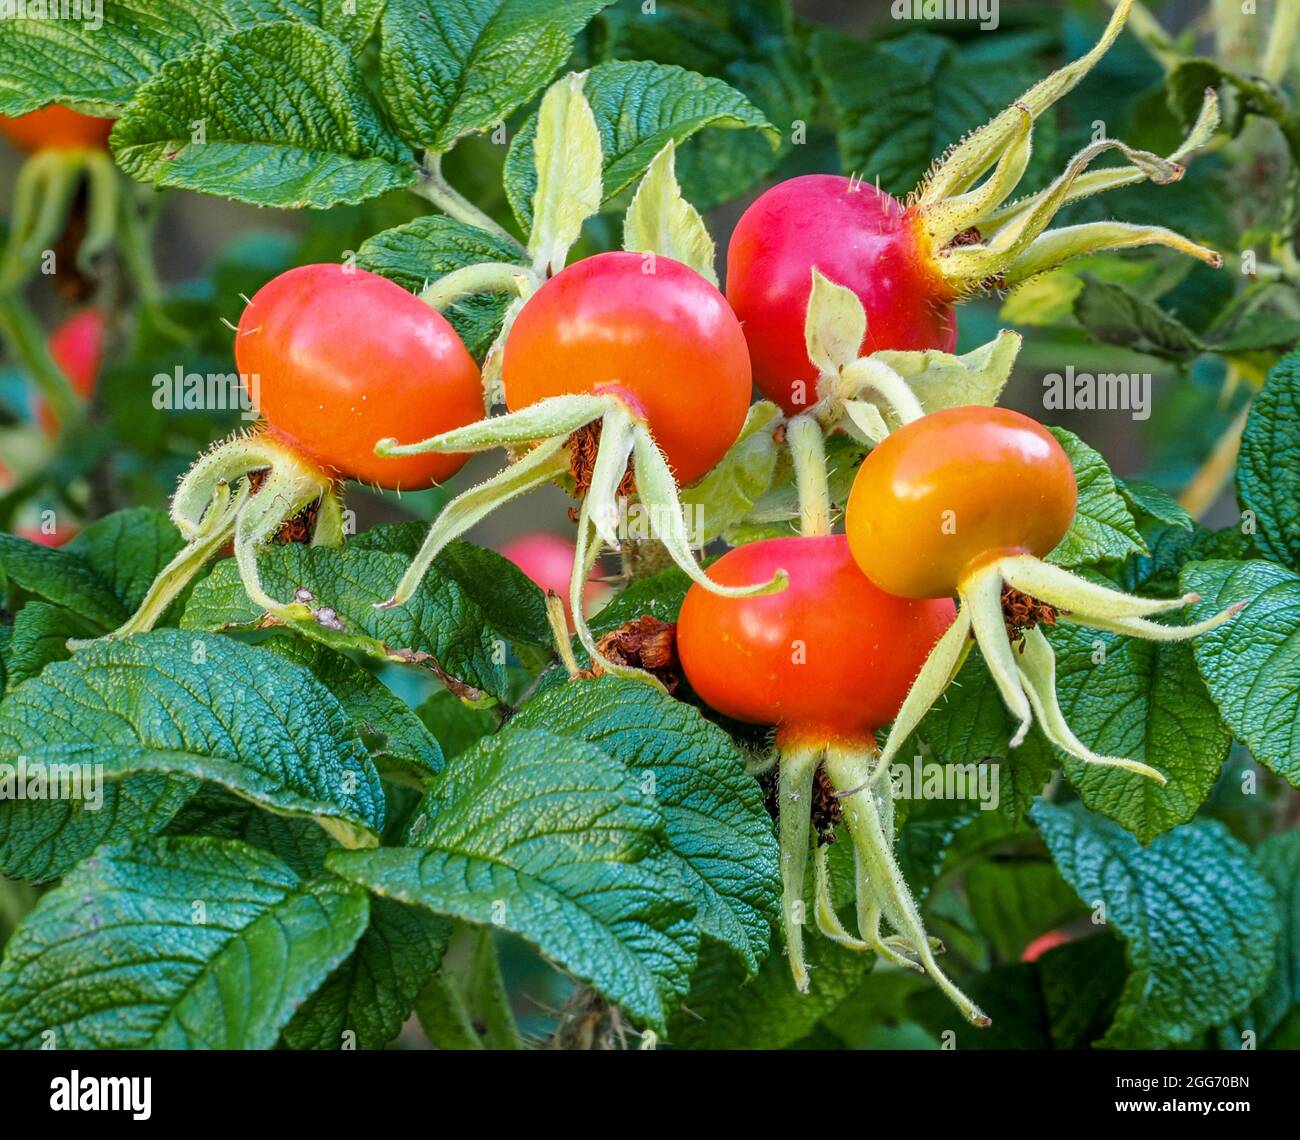 Large hips of Rosa rugosa used as an ornamental hedging plant for its blousy pink flowers and orange fruits - Somerset UK Stock Photo